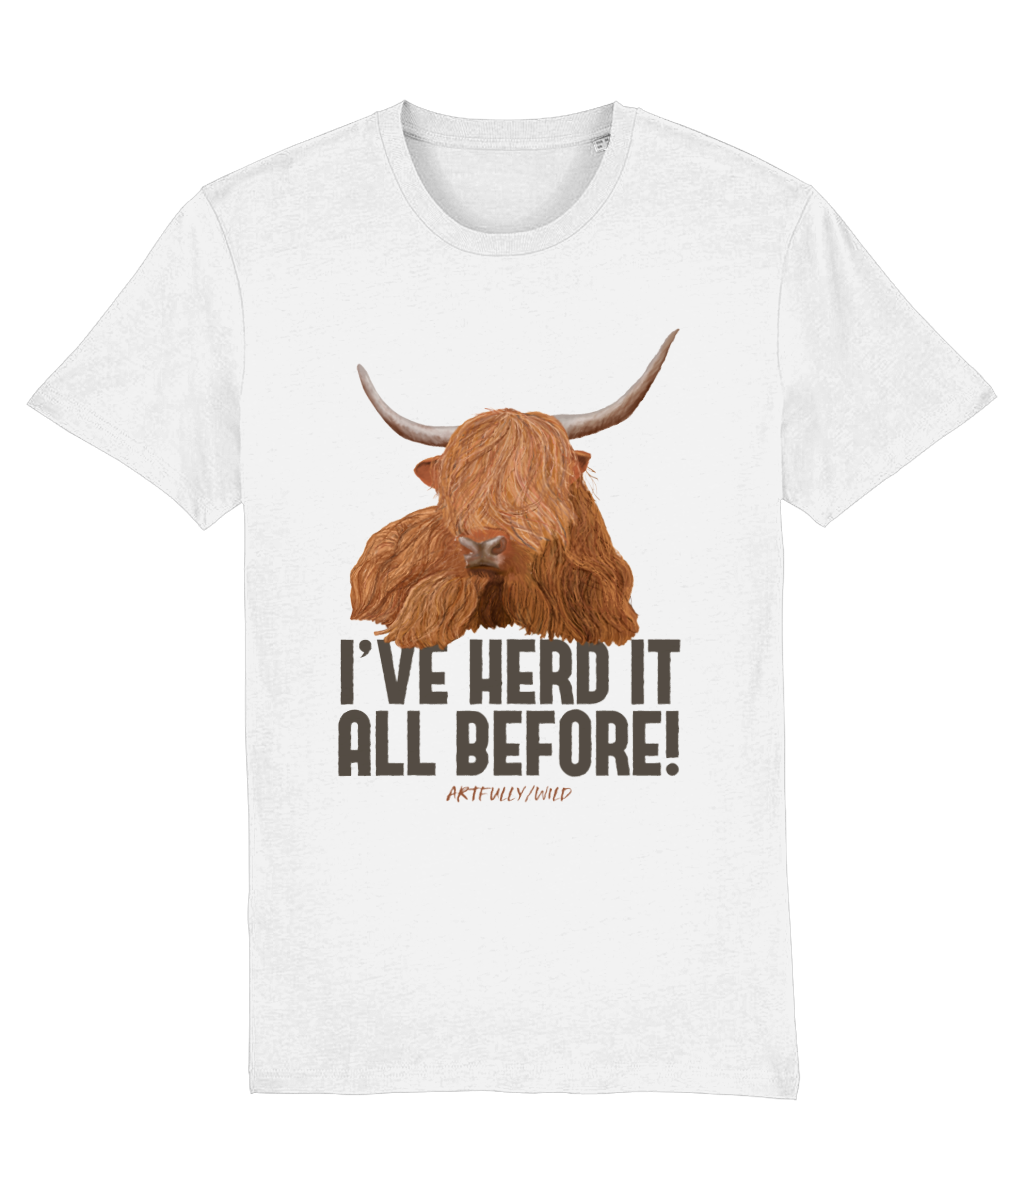 'HERD IT' HIGHLAND COW Print on White Organic T-Shirt. Unisex/Women/Men. Original Illustration by Artfully/Wild. Printed with water-based inks in the UK for wildlife lovers.